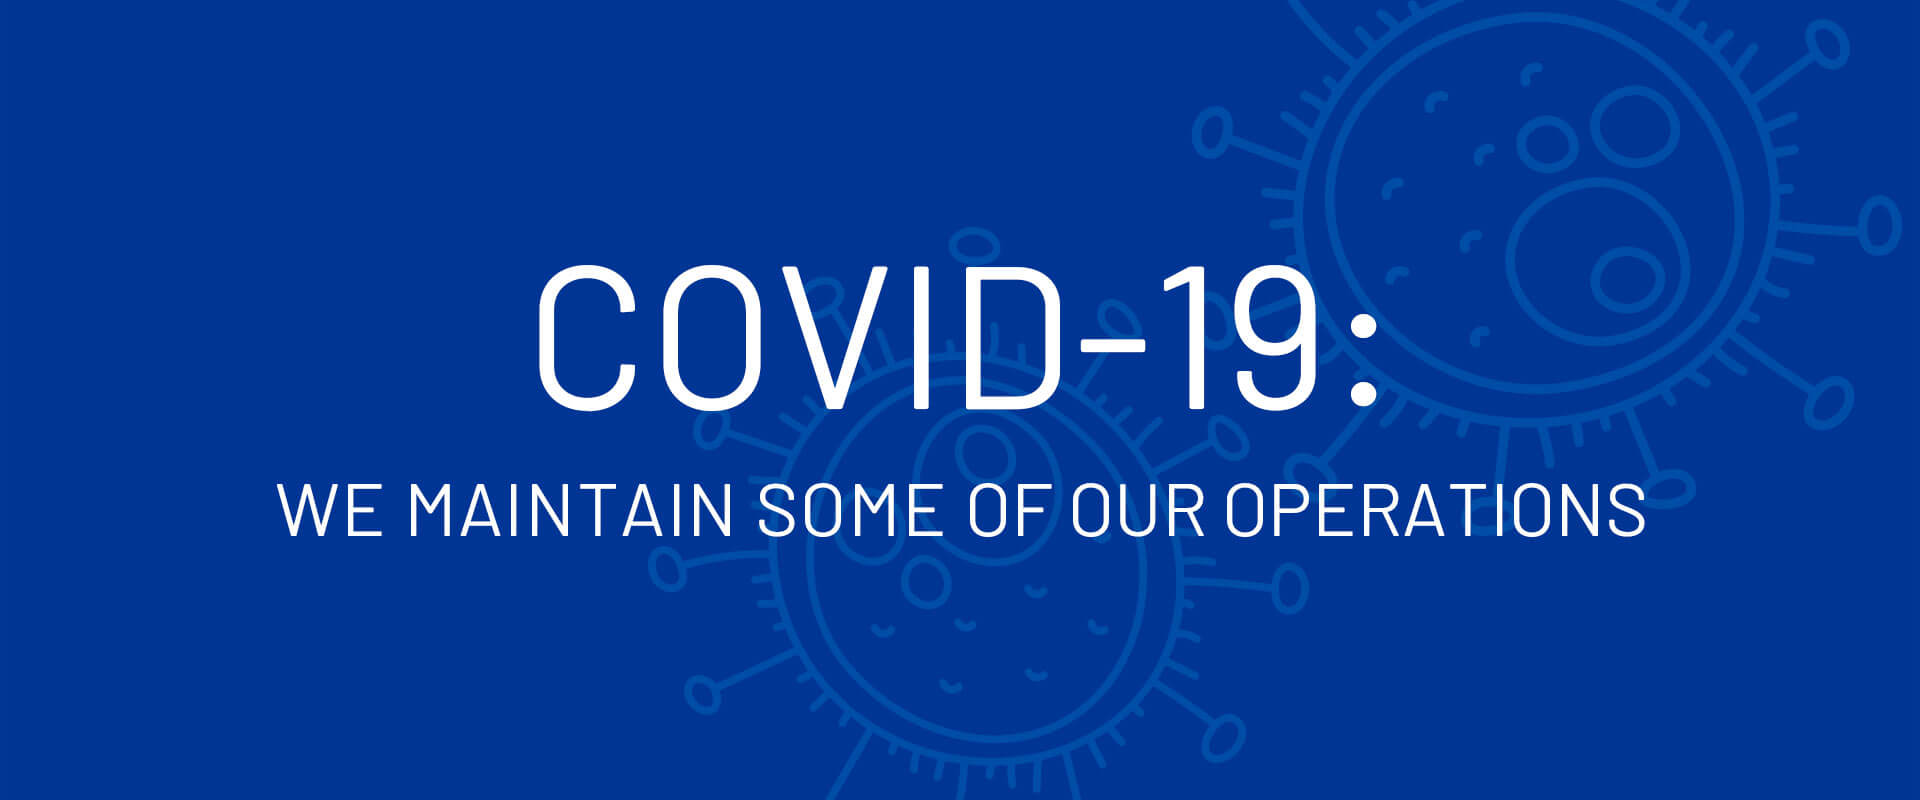 COVID-19: We maintain some of our operations